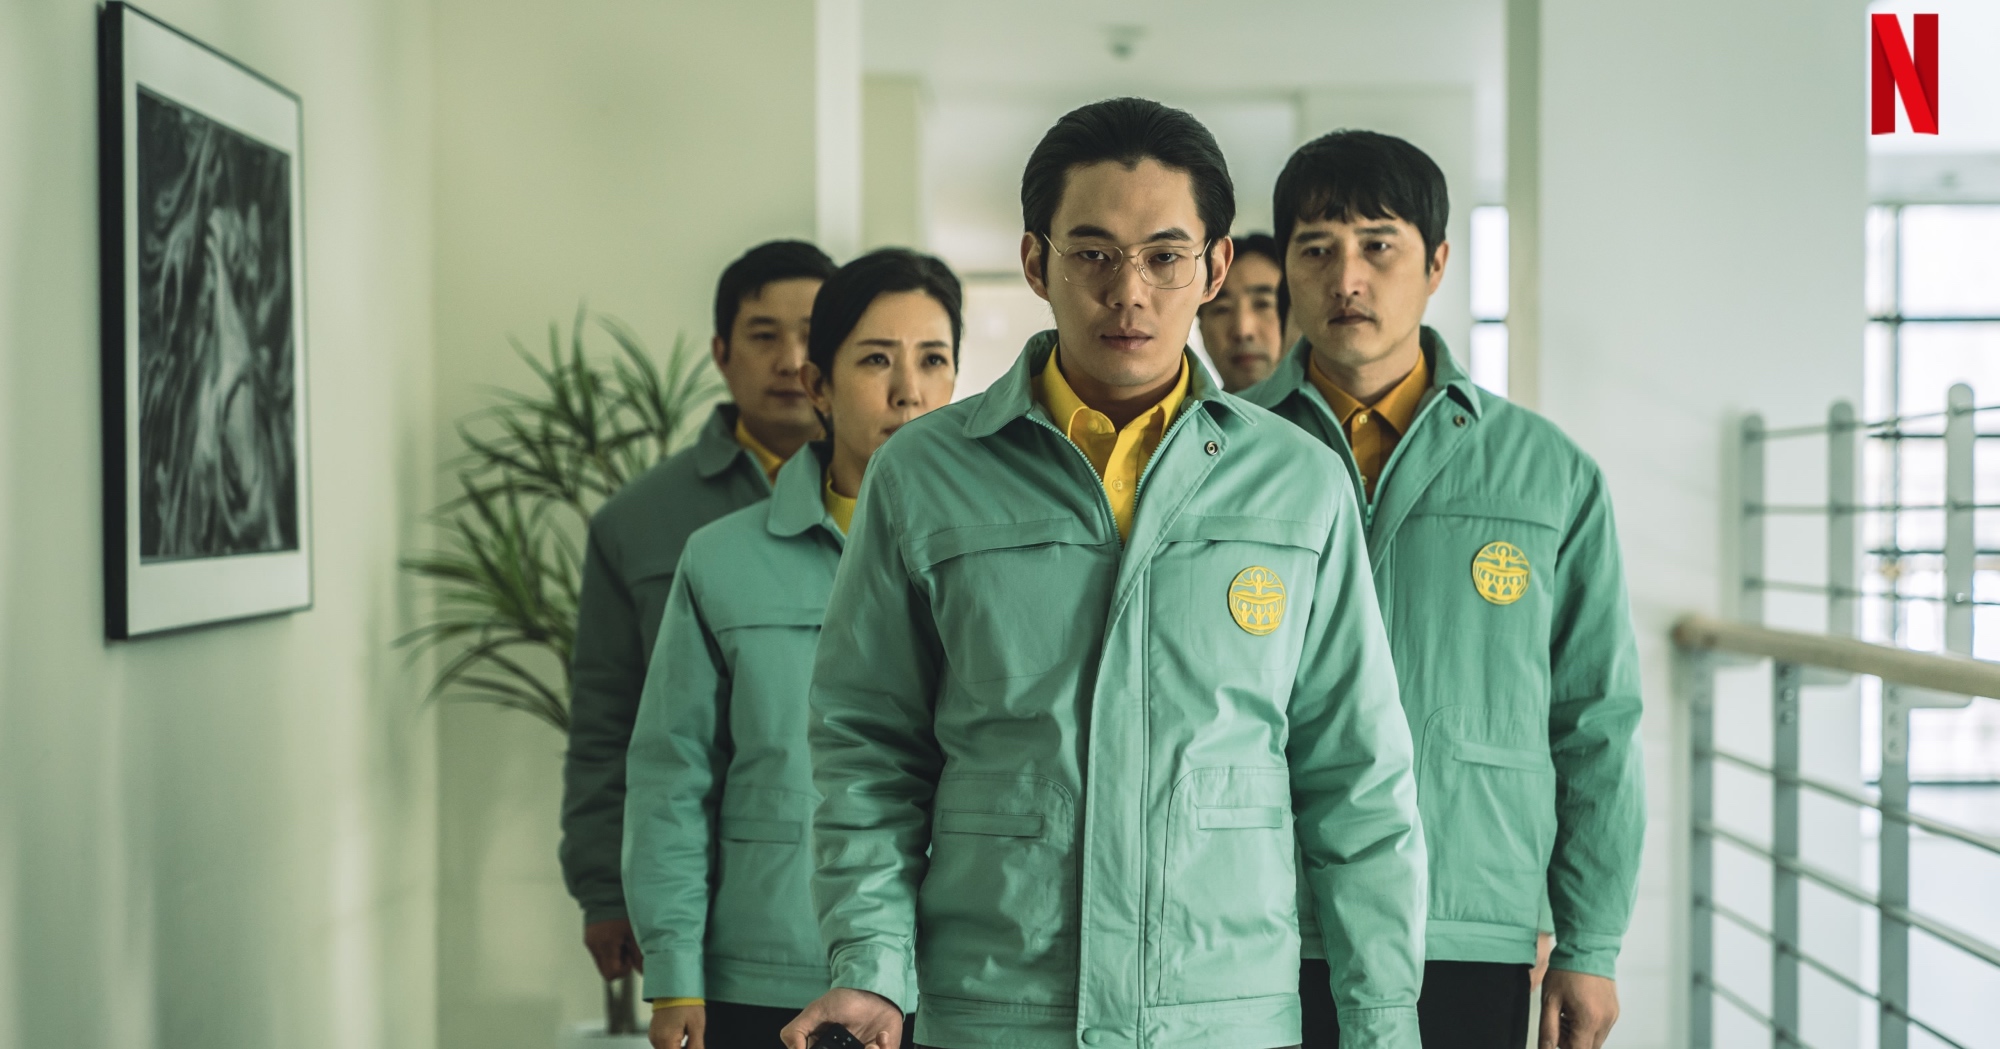 Members of the New Truth Society in 'Hellbound' K-drama wearing green jackets.